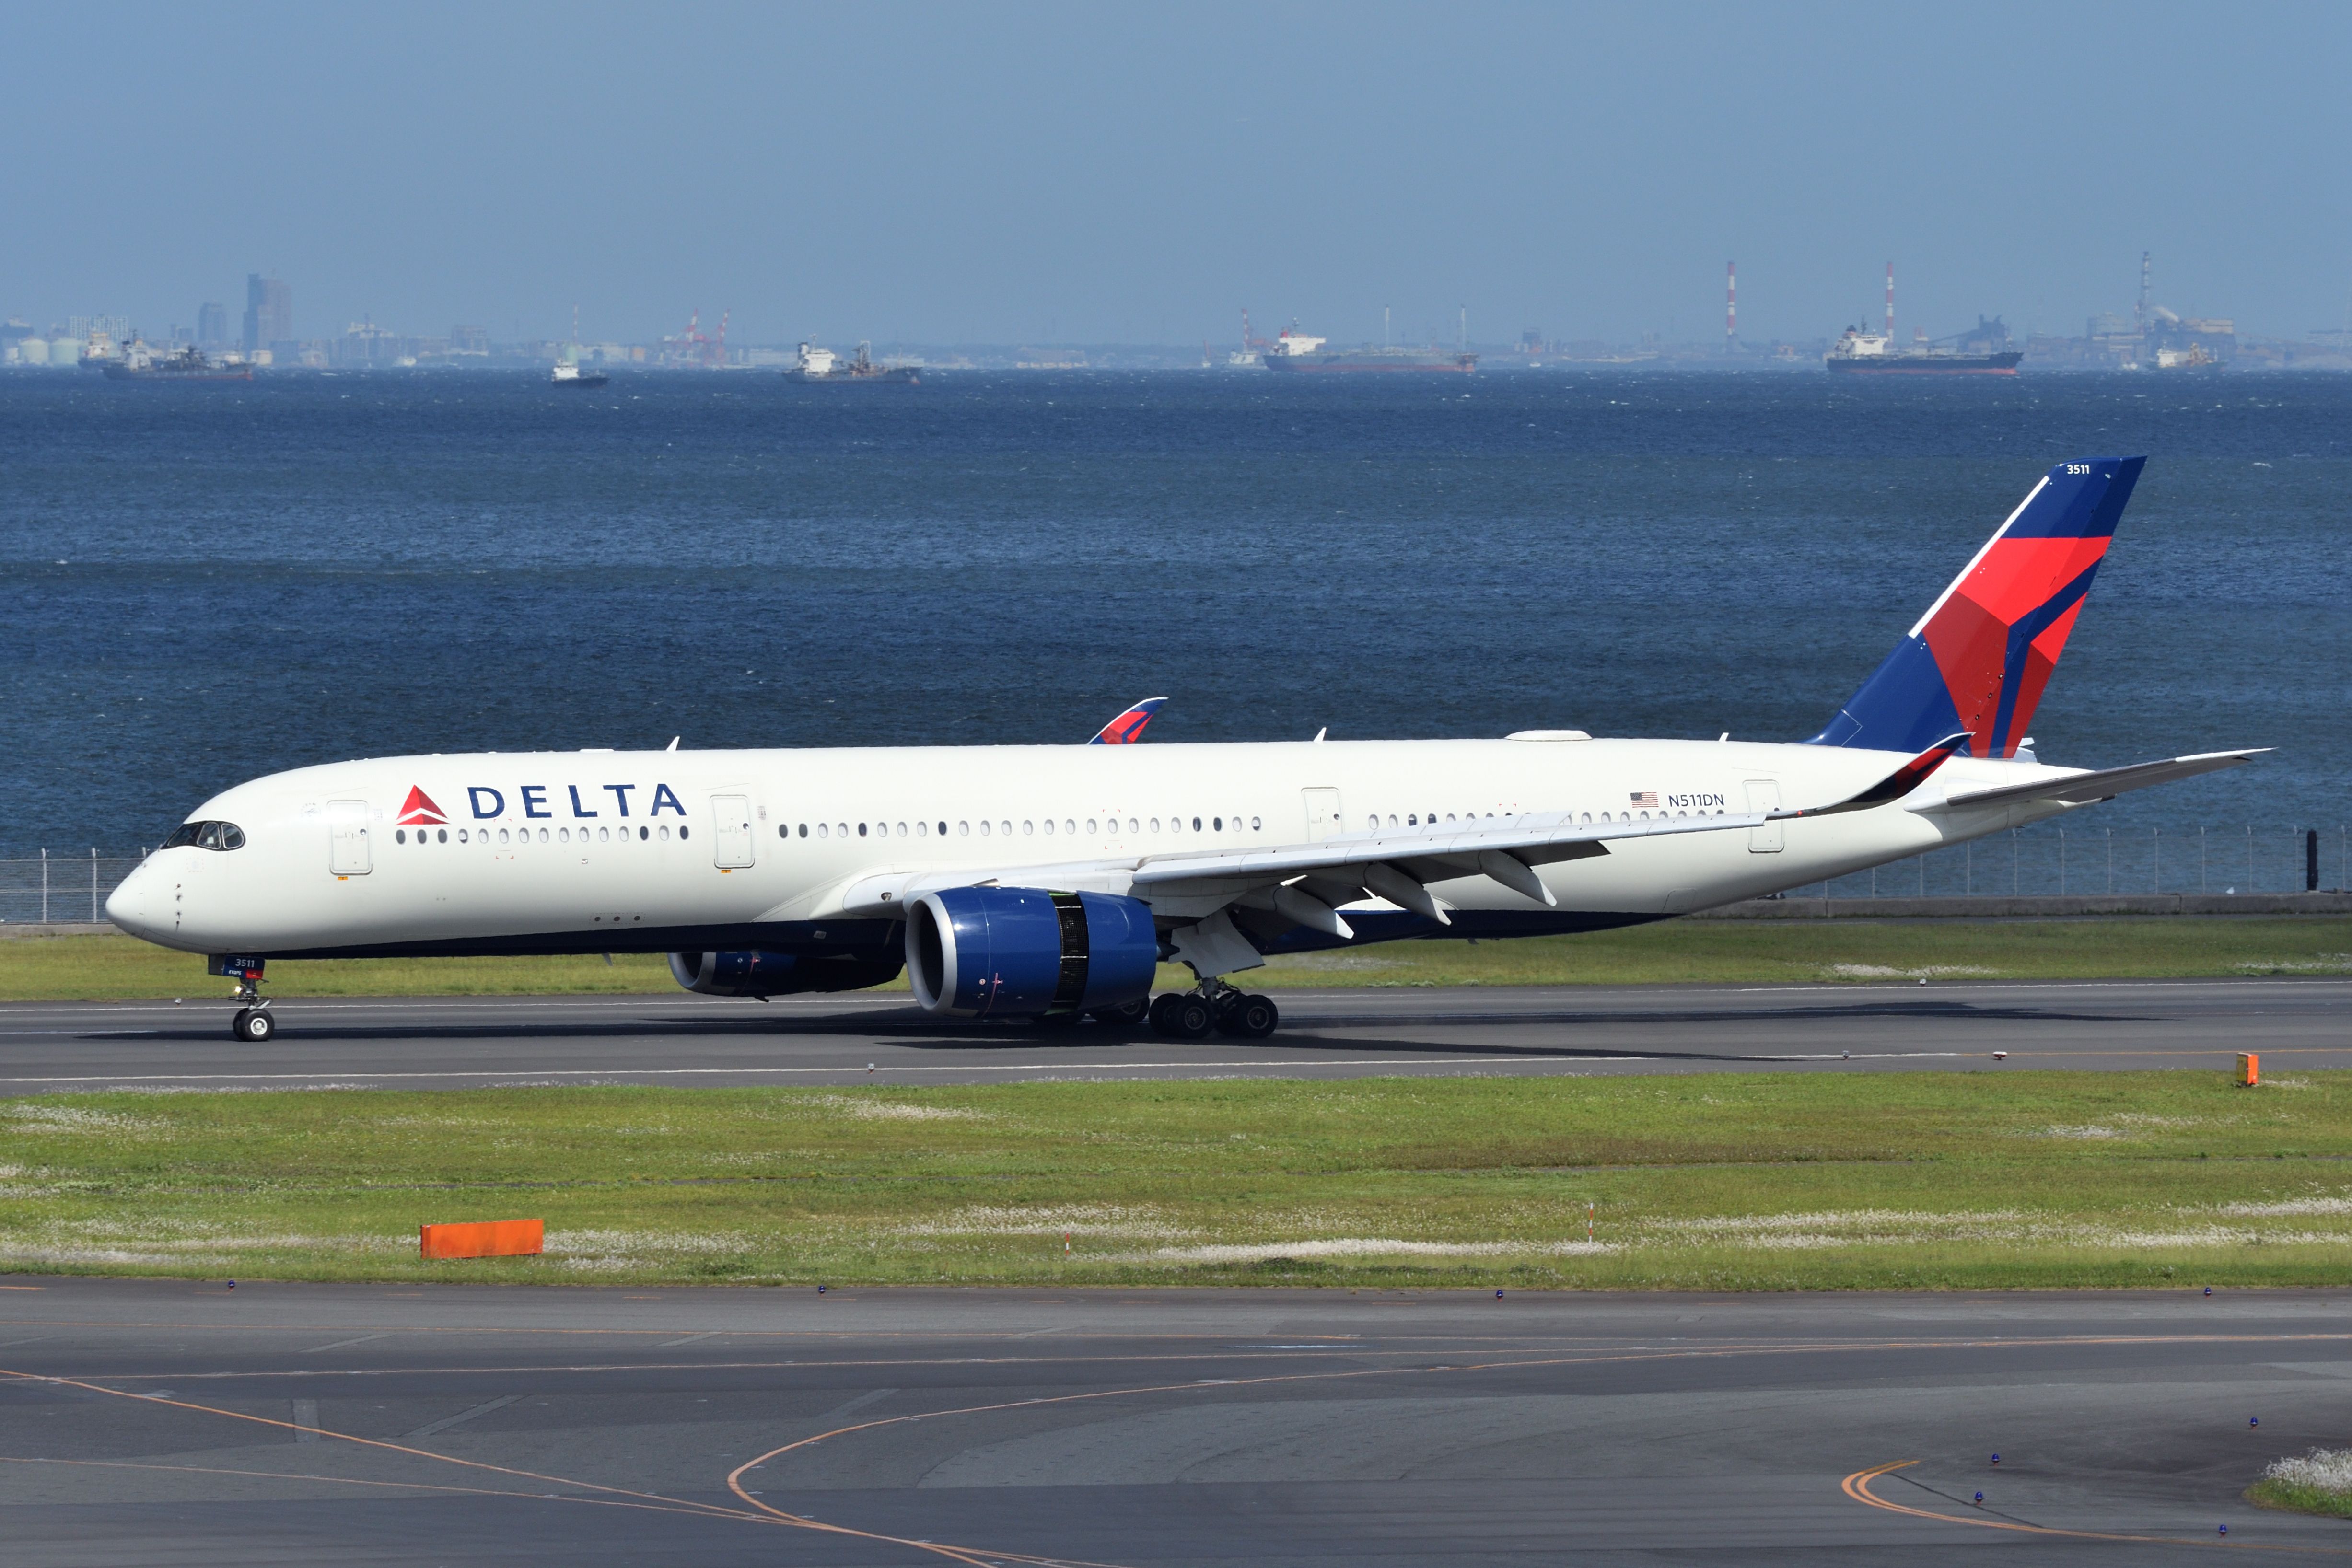 Delta Air Lines Opens New Sky Club With Stunning Views Of Boston Harbor